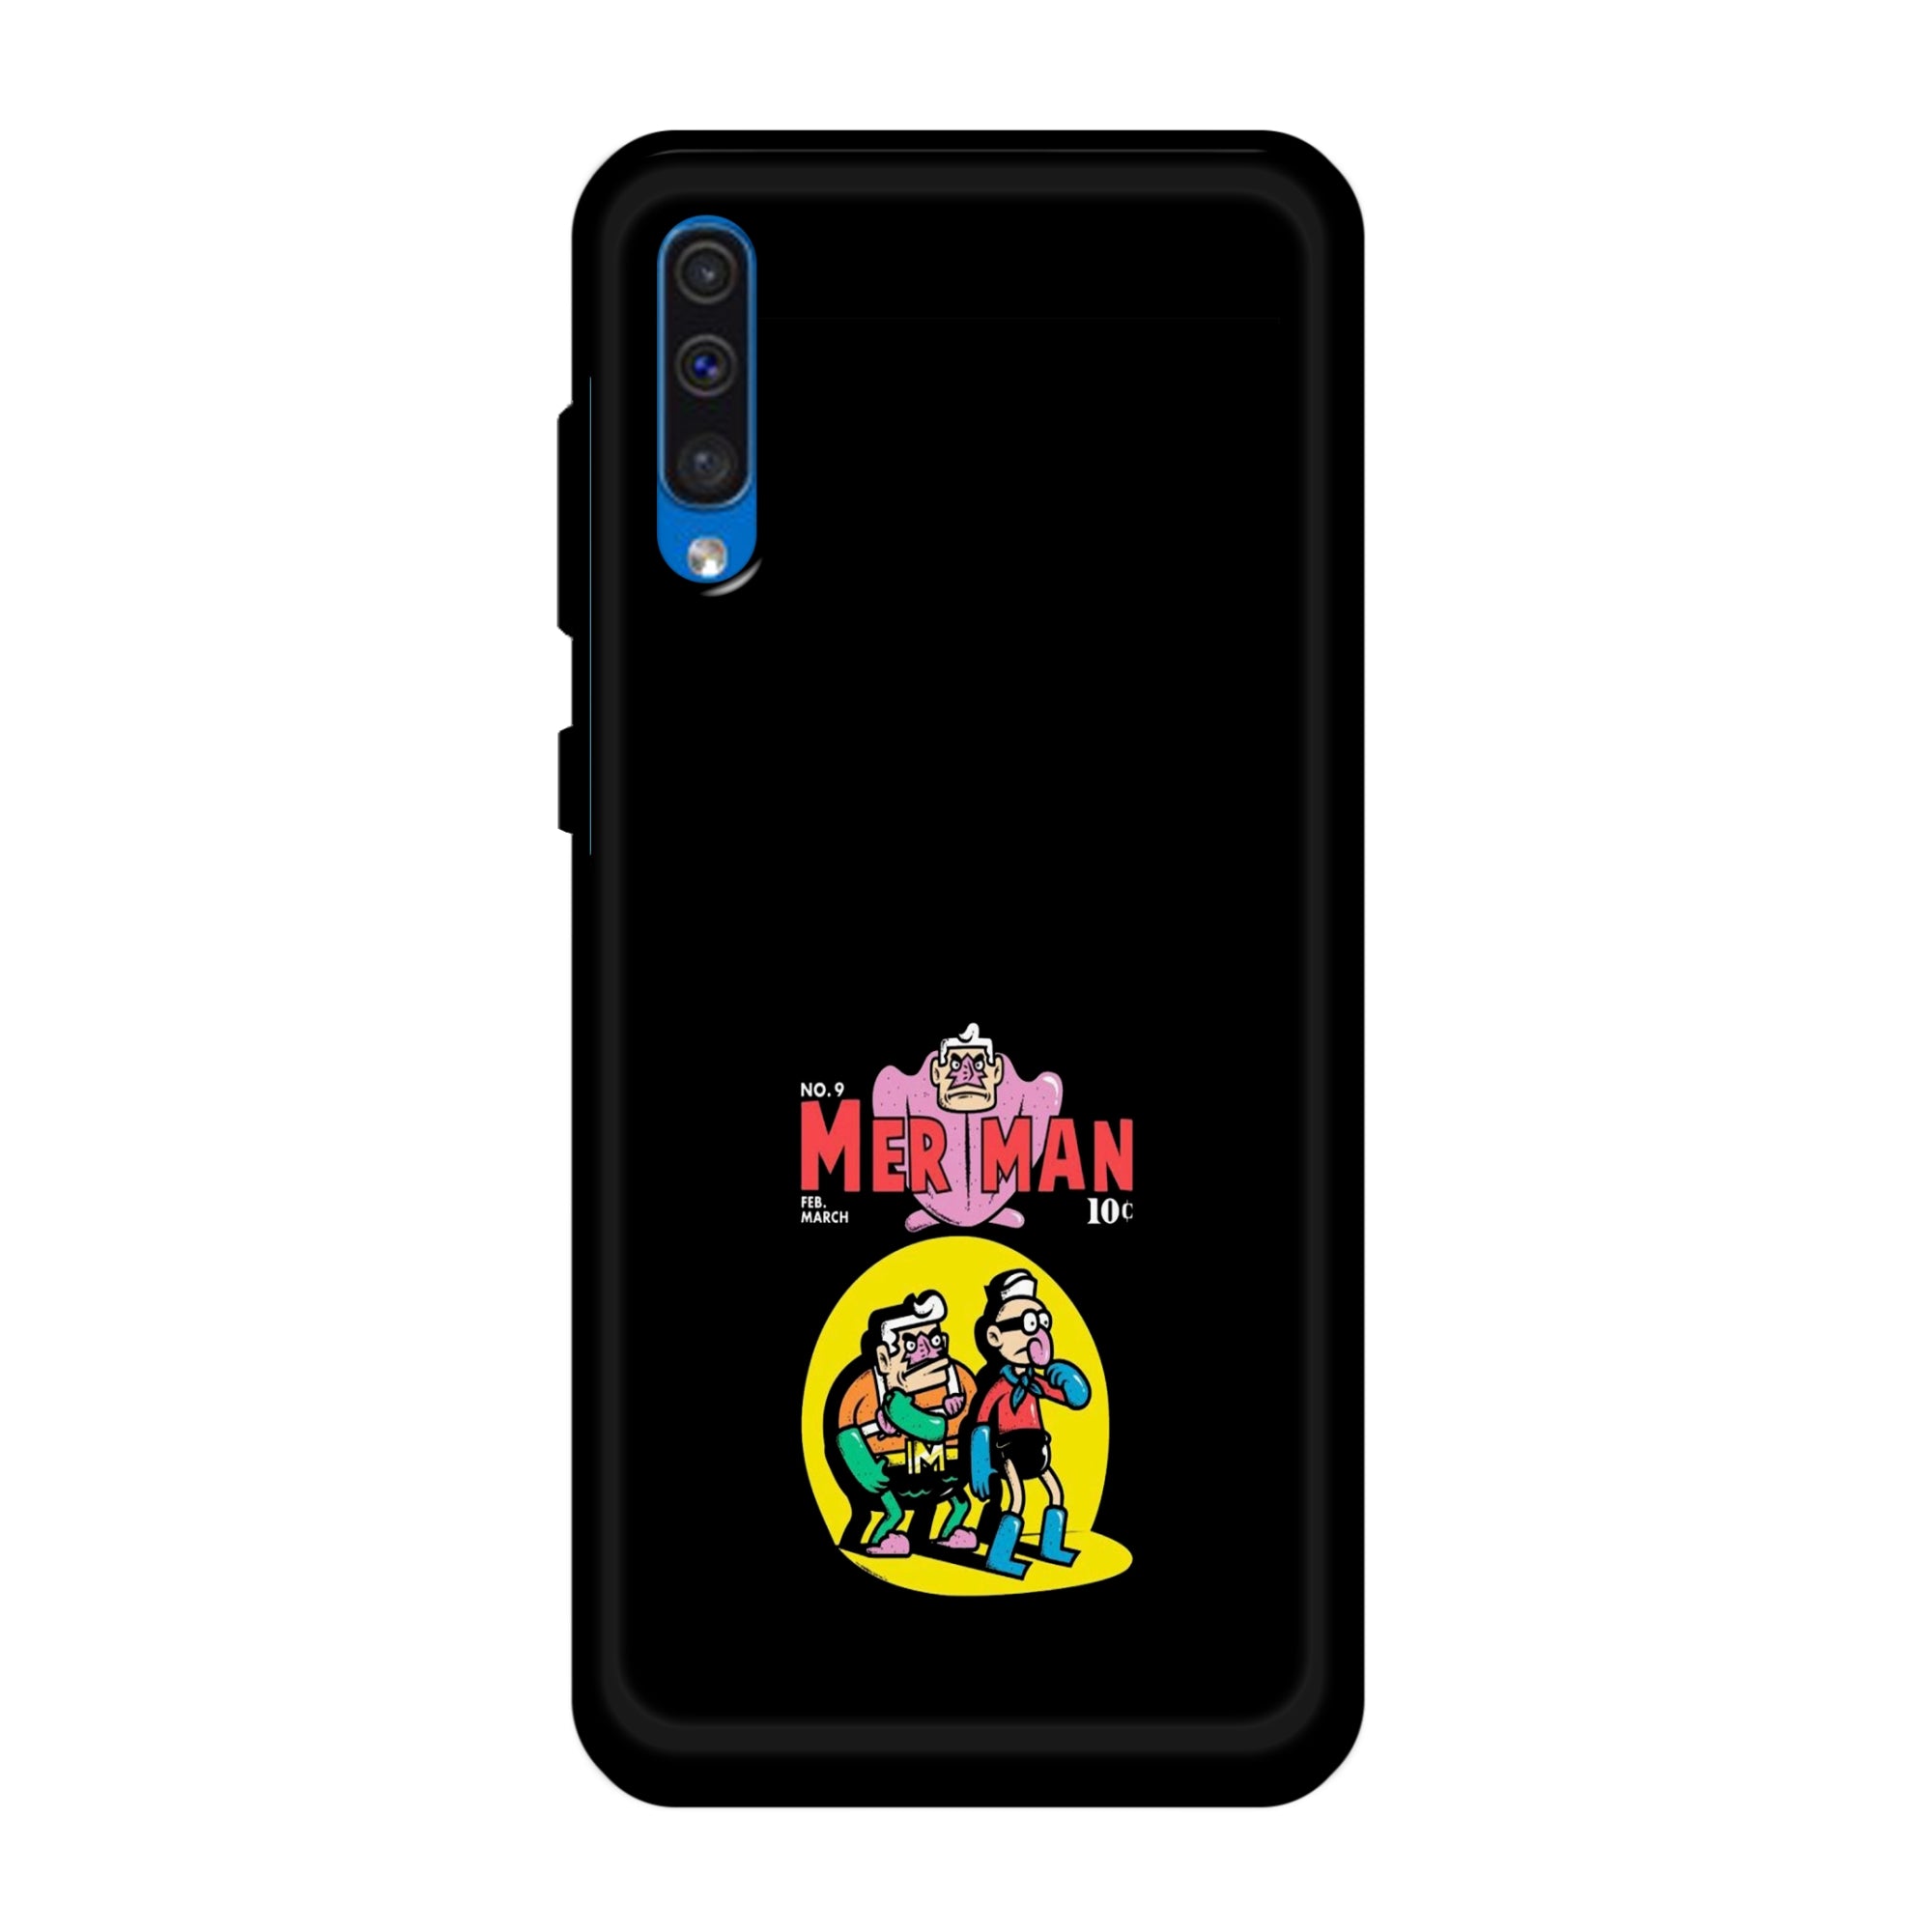 Buy Merman Metal-Silicon Back Mobile Phone Case/Cover For Samsung Galaxy A50 / A50s / A30s Online